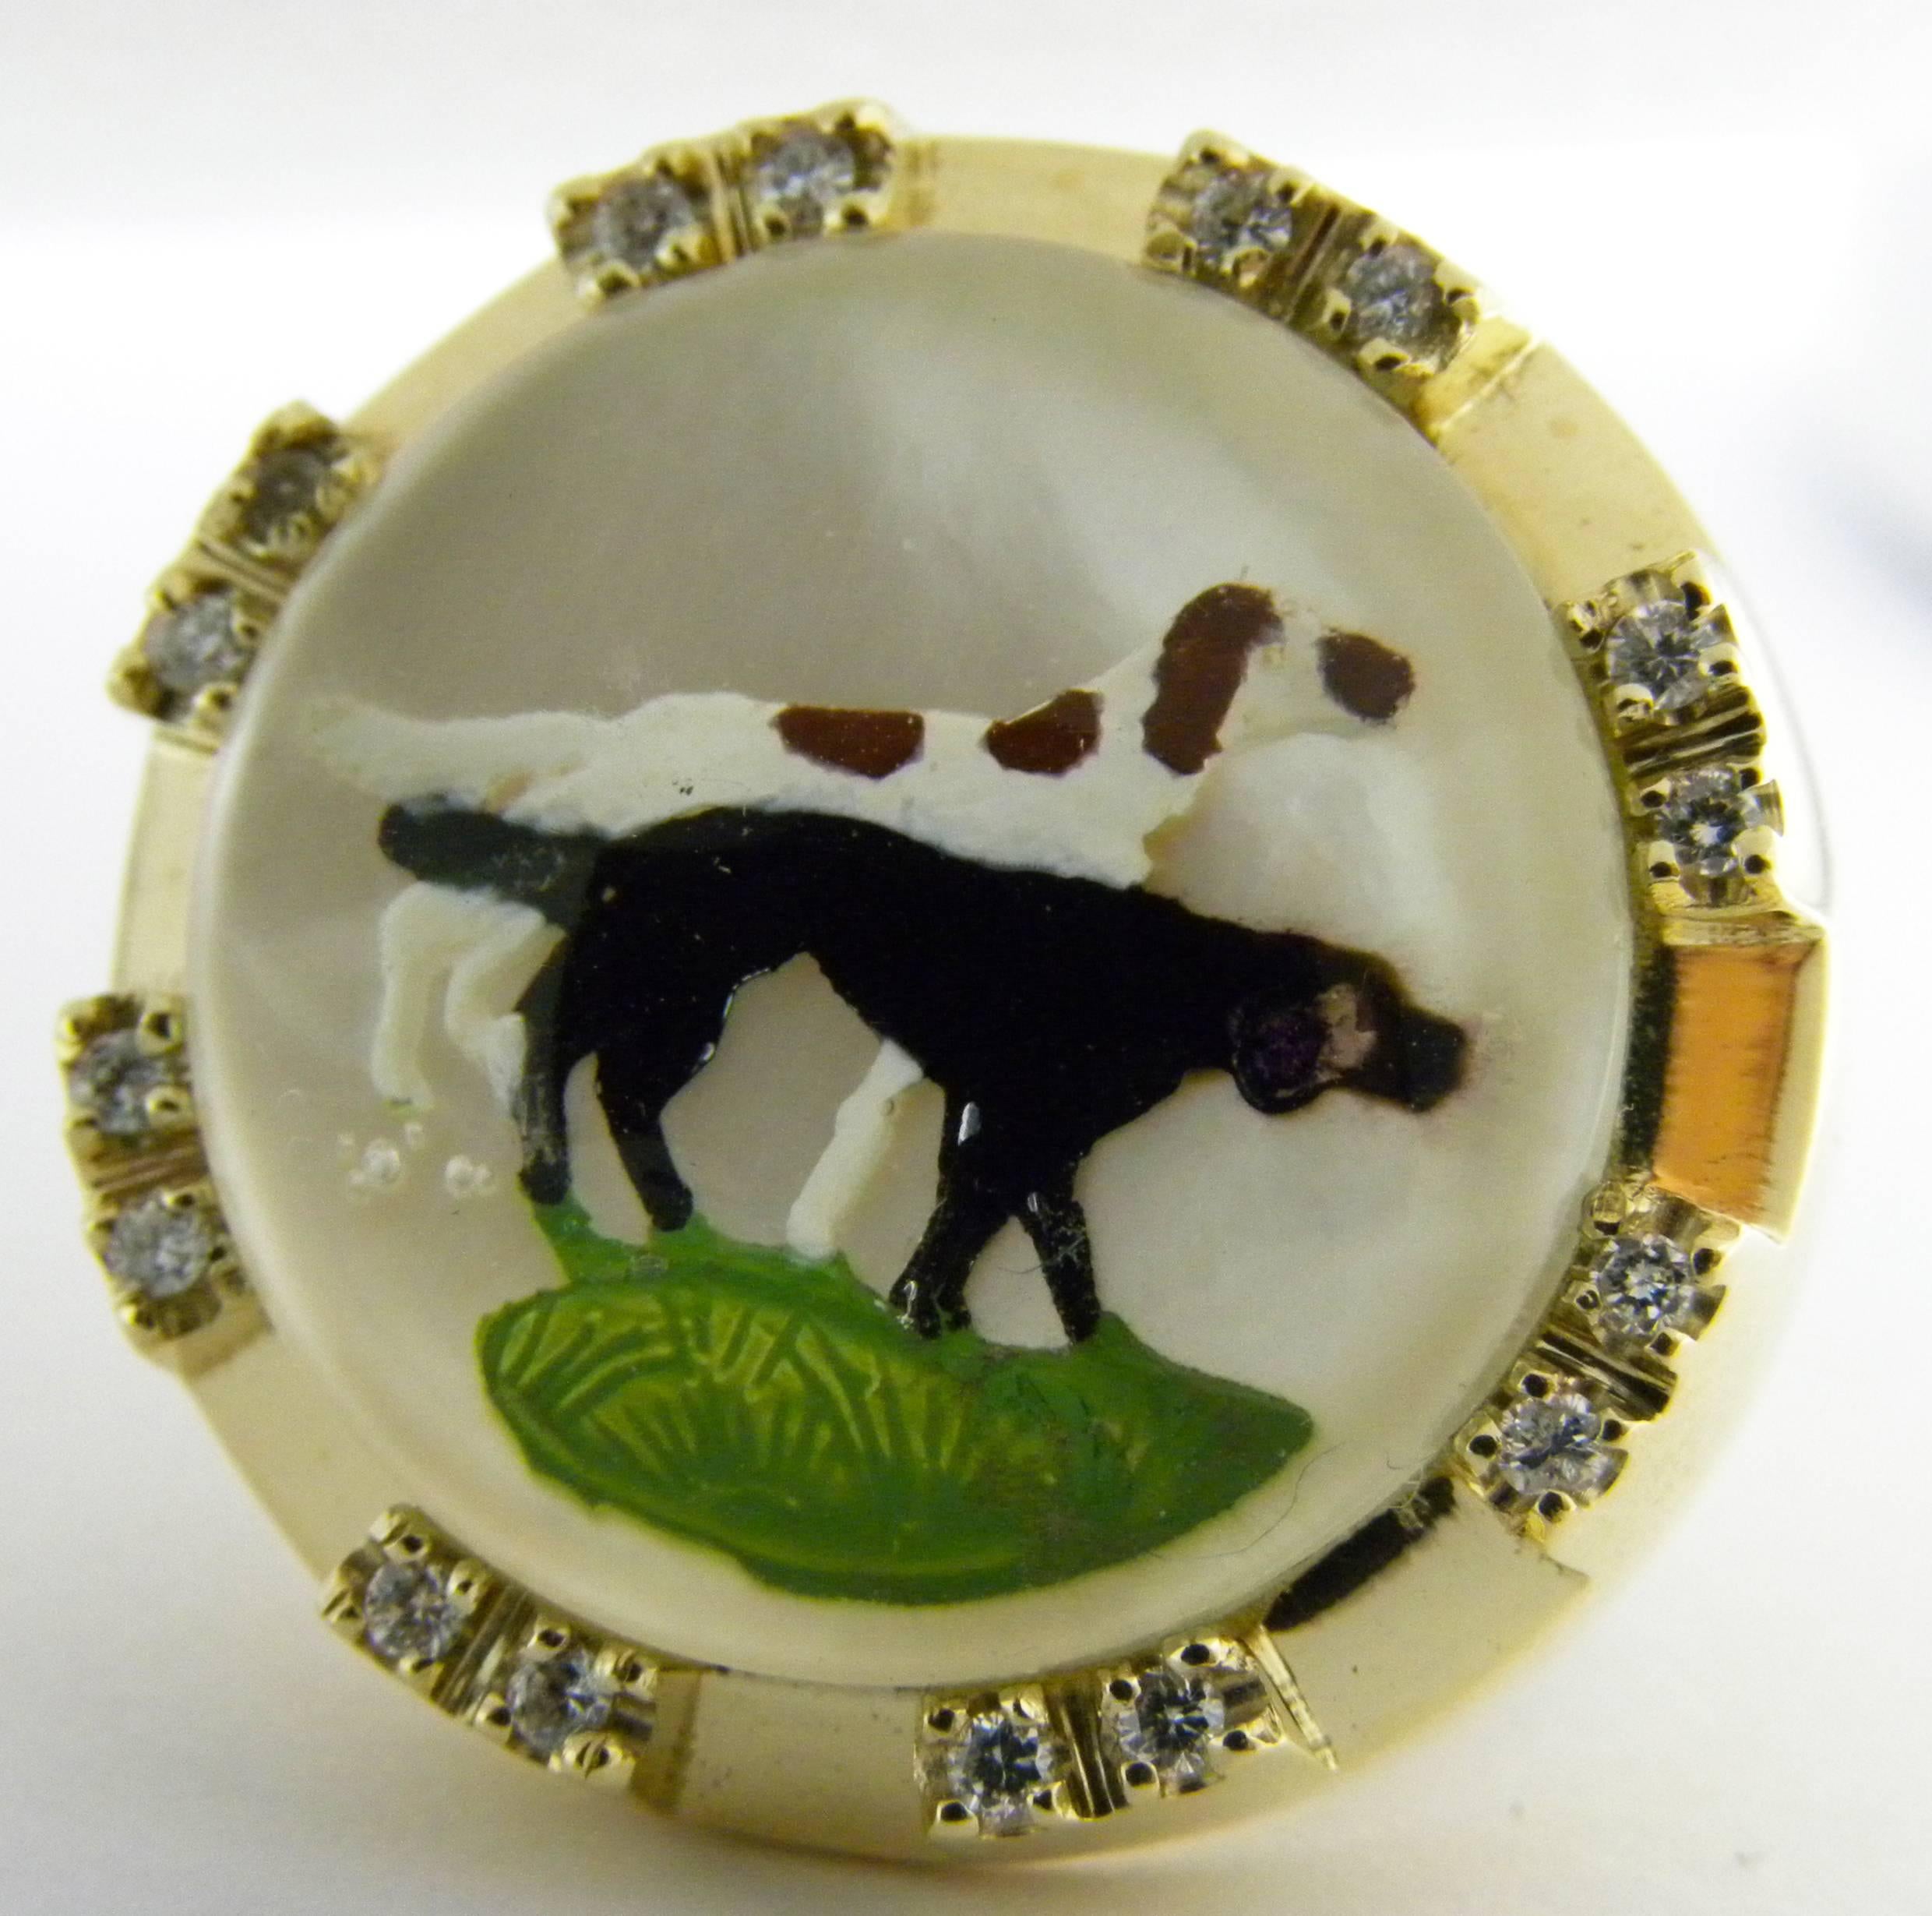 Essex Glasses or Reverse Painting Under Crystal featuring two hounds in a diamond and yellow gold signet ring setting.
The multicolor painting creates an unusual three-dimensional effect.
Giovanni Berca loved Essex Glasses and used to collect them